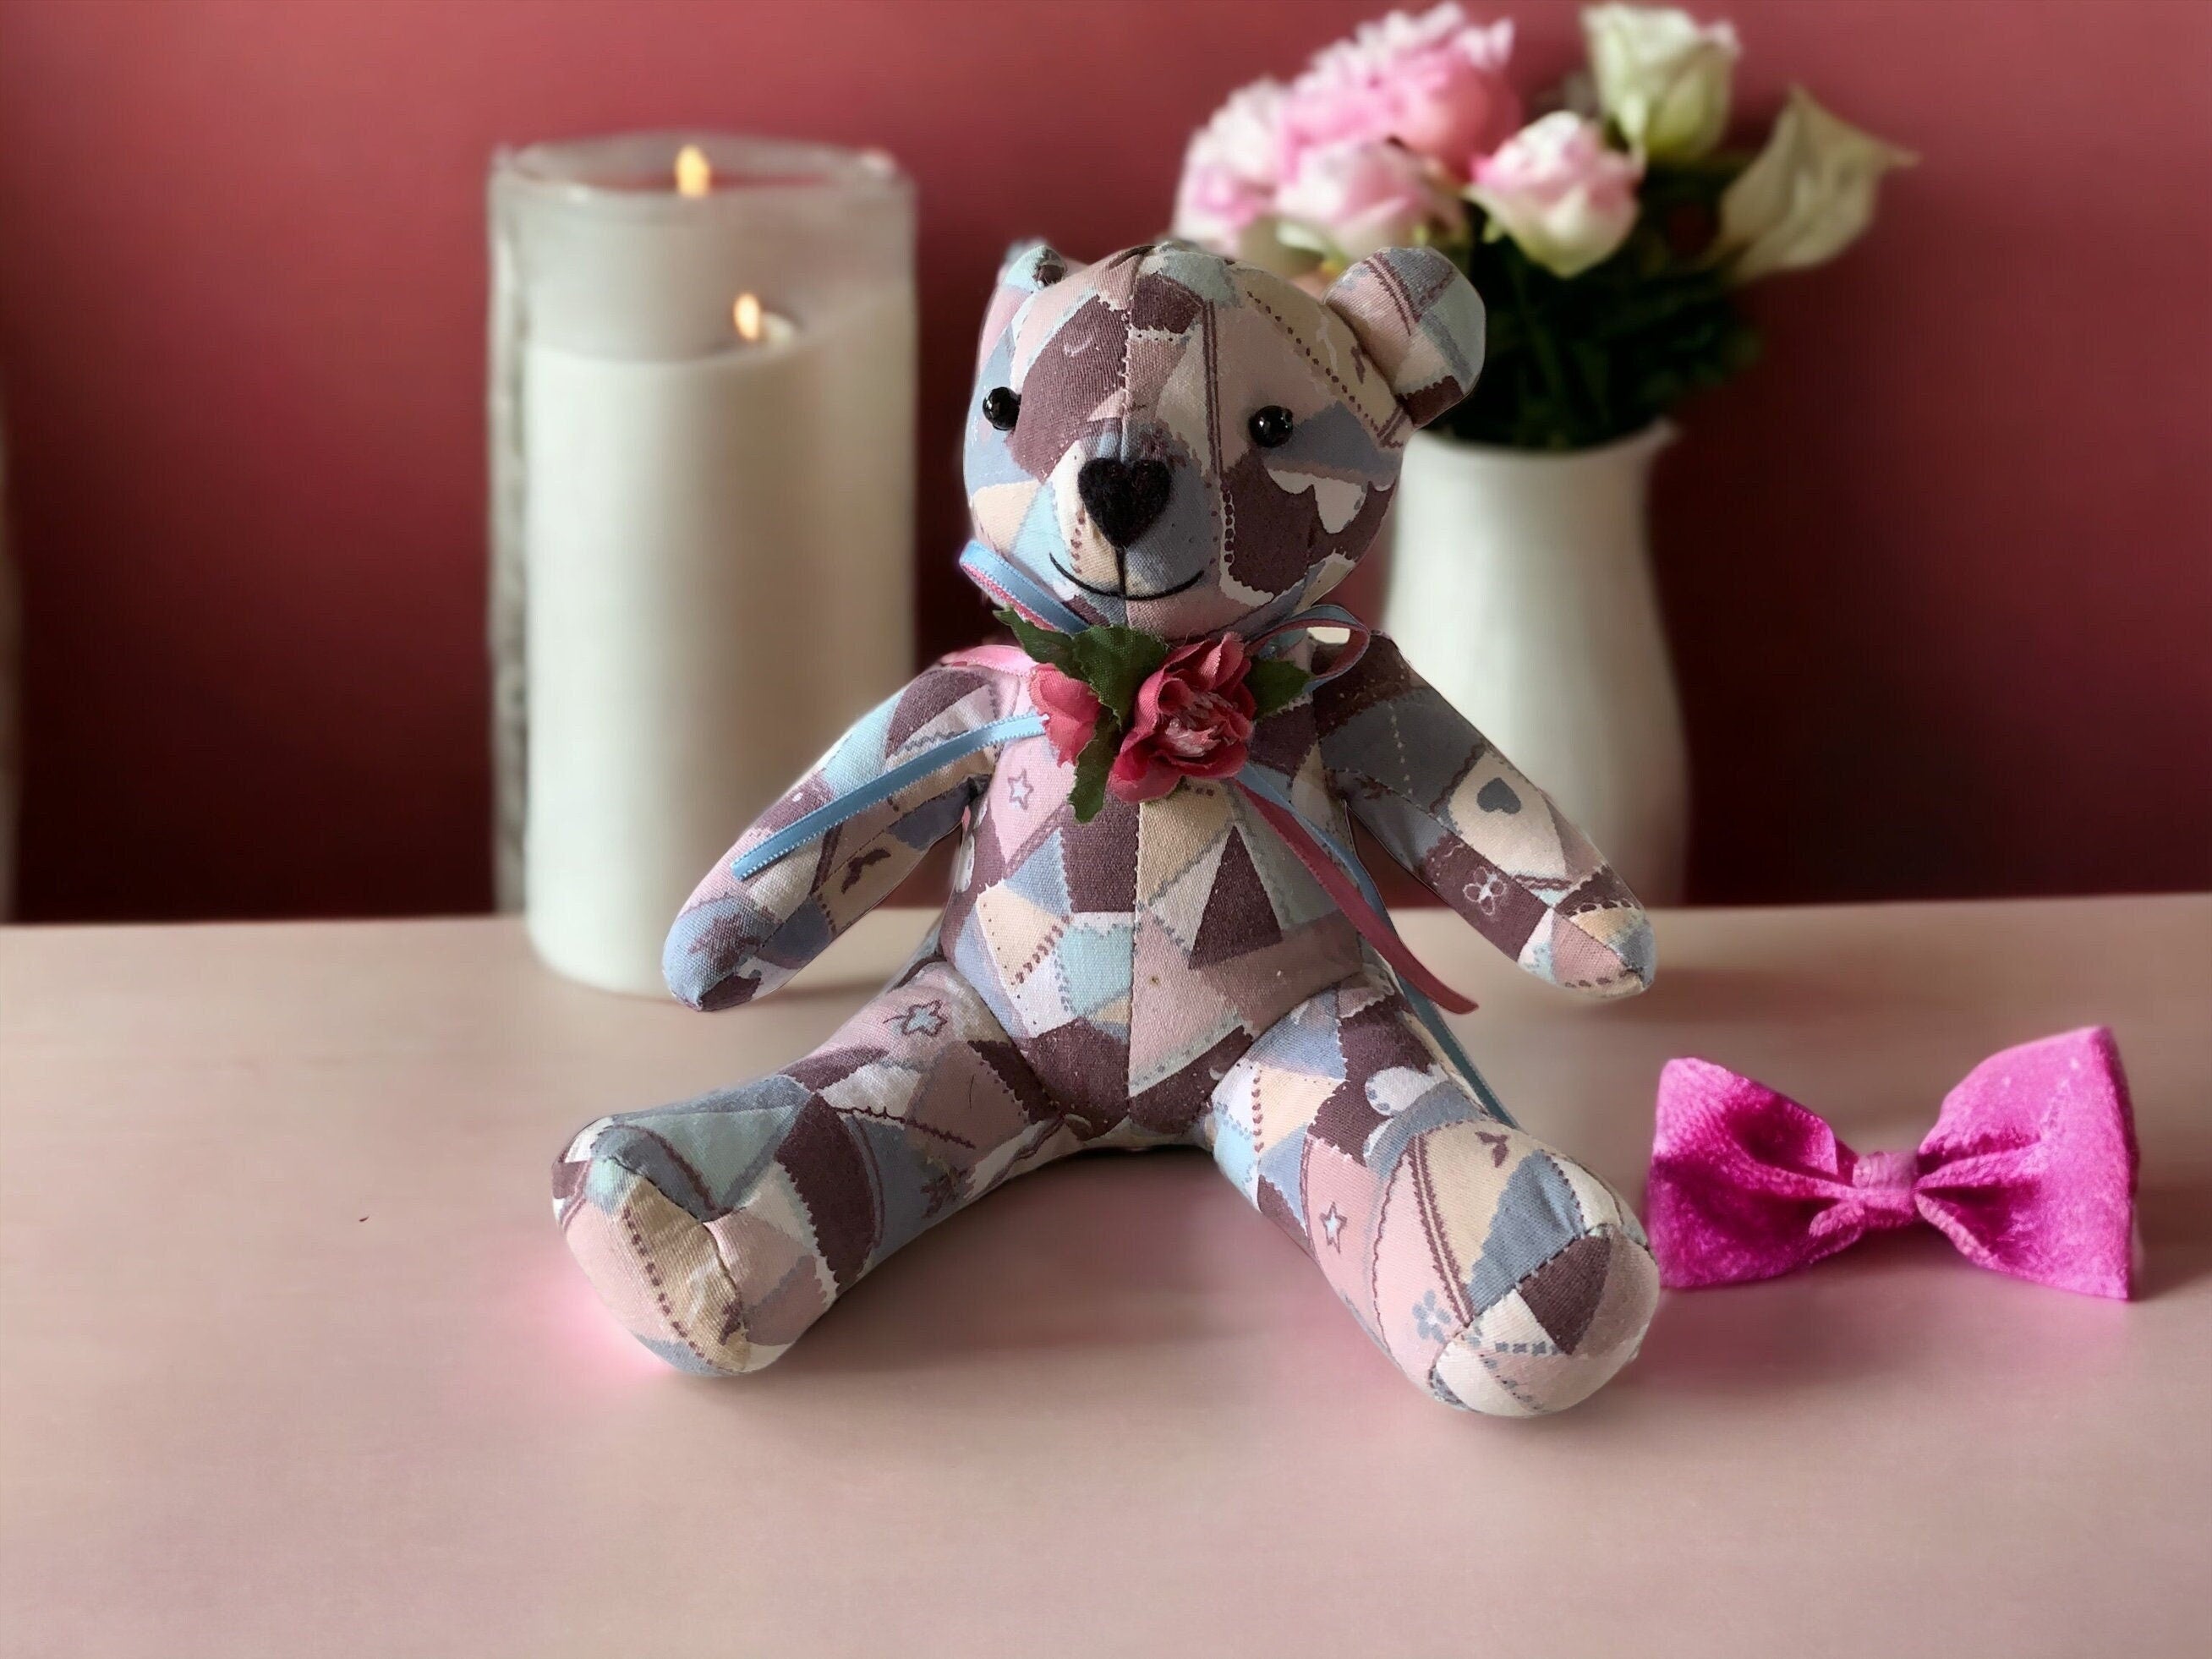 Small Vintage Country Patchwork Teddy